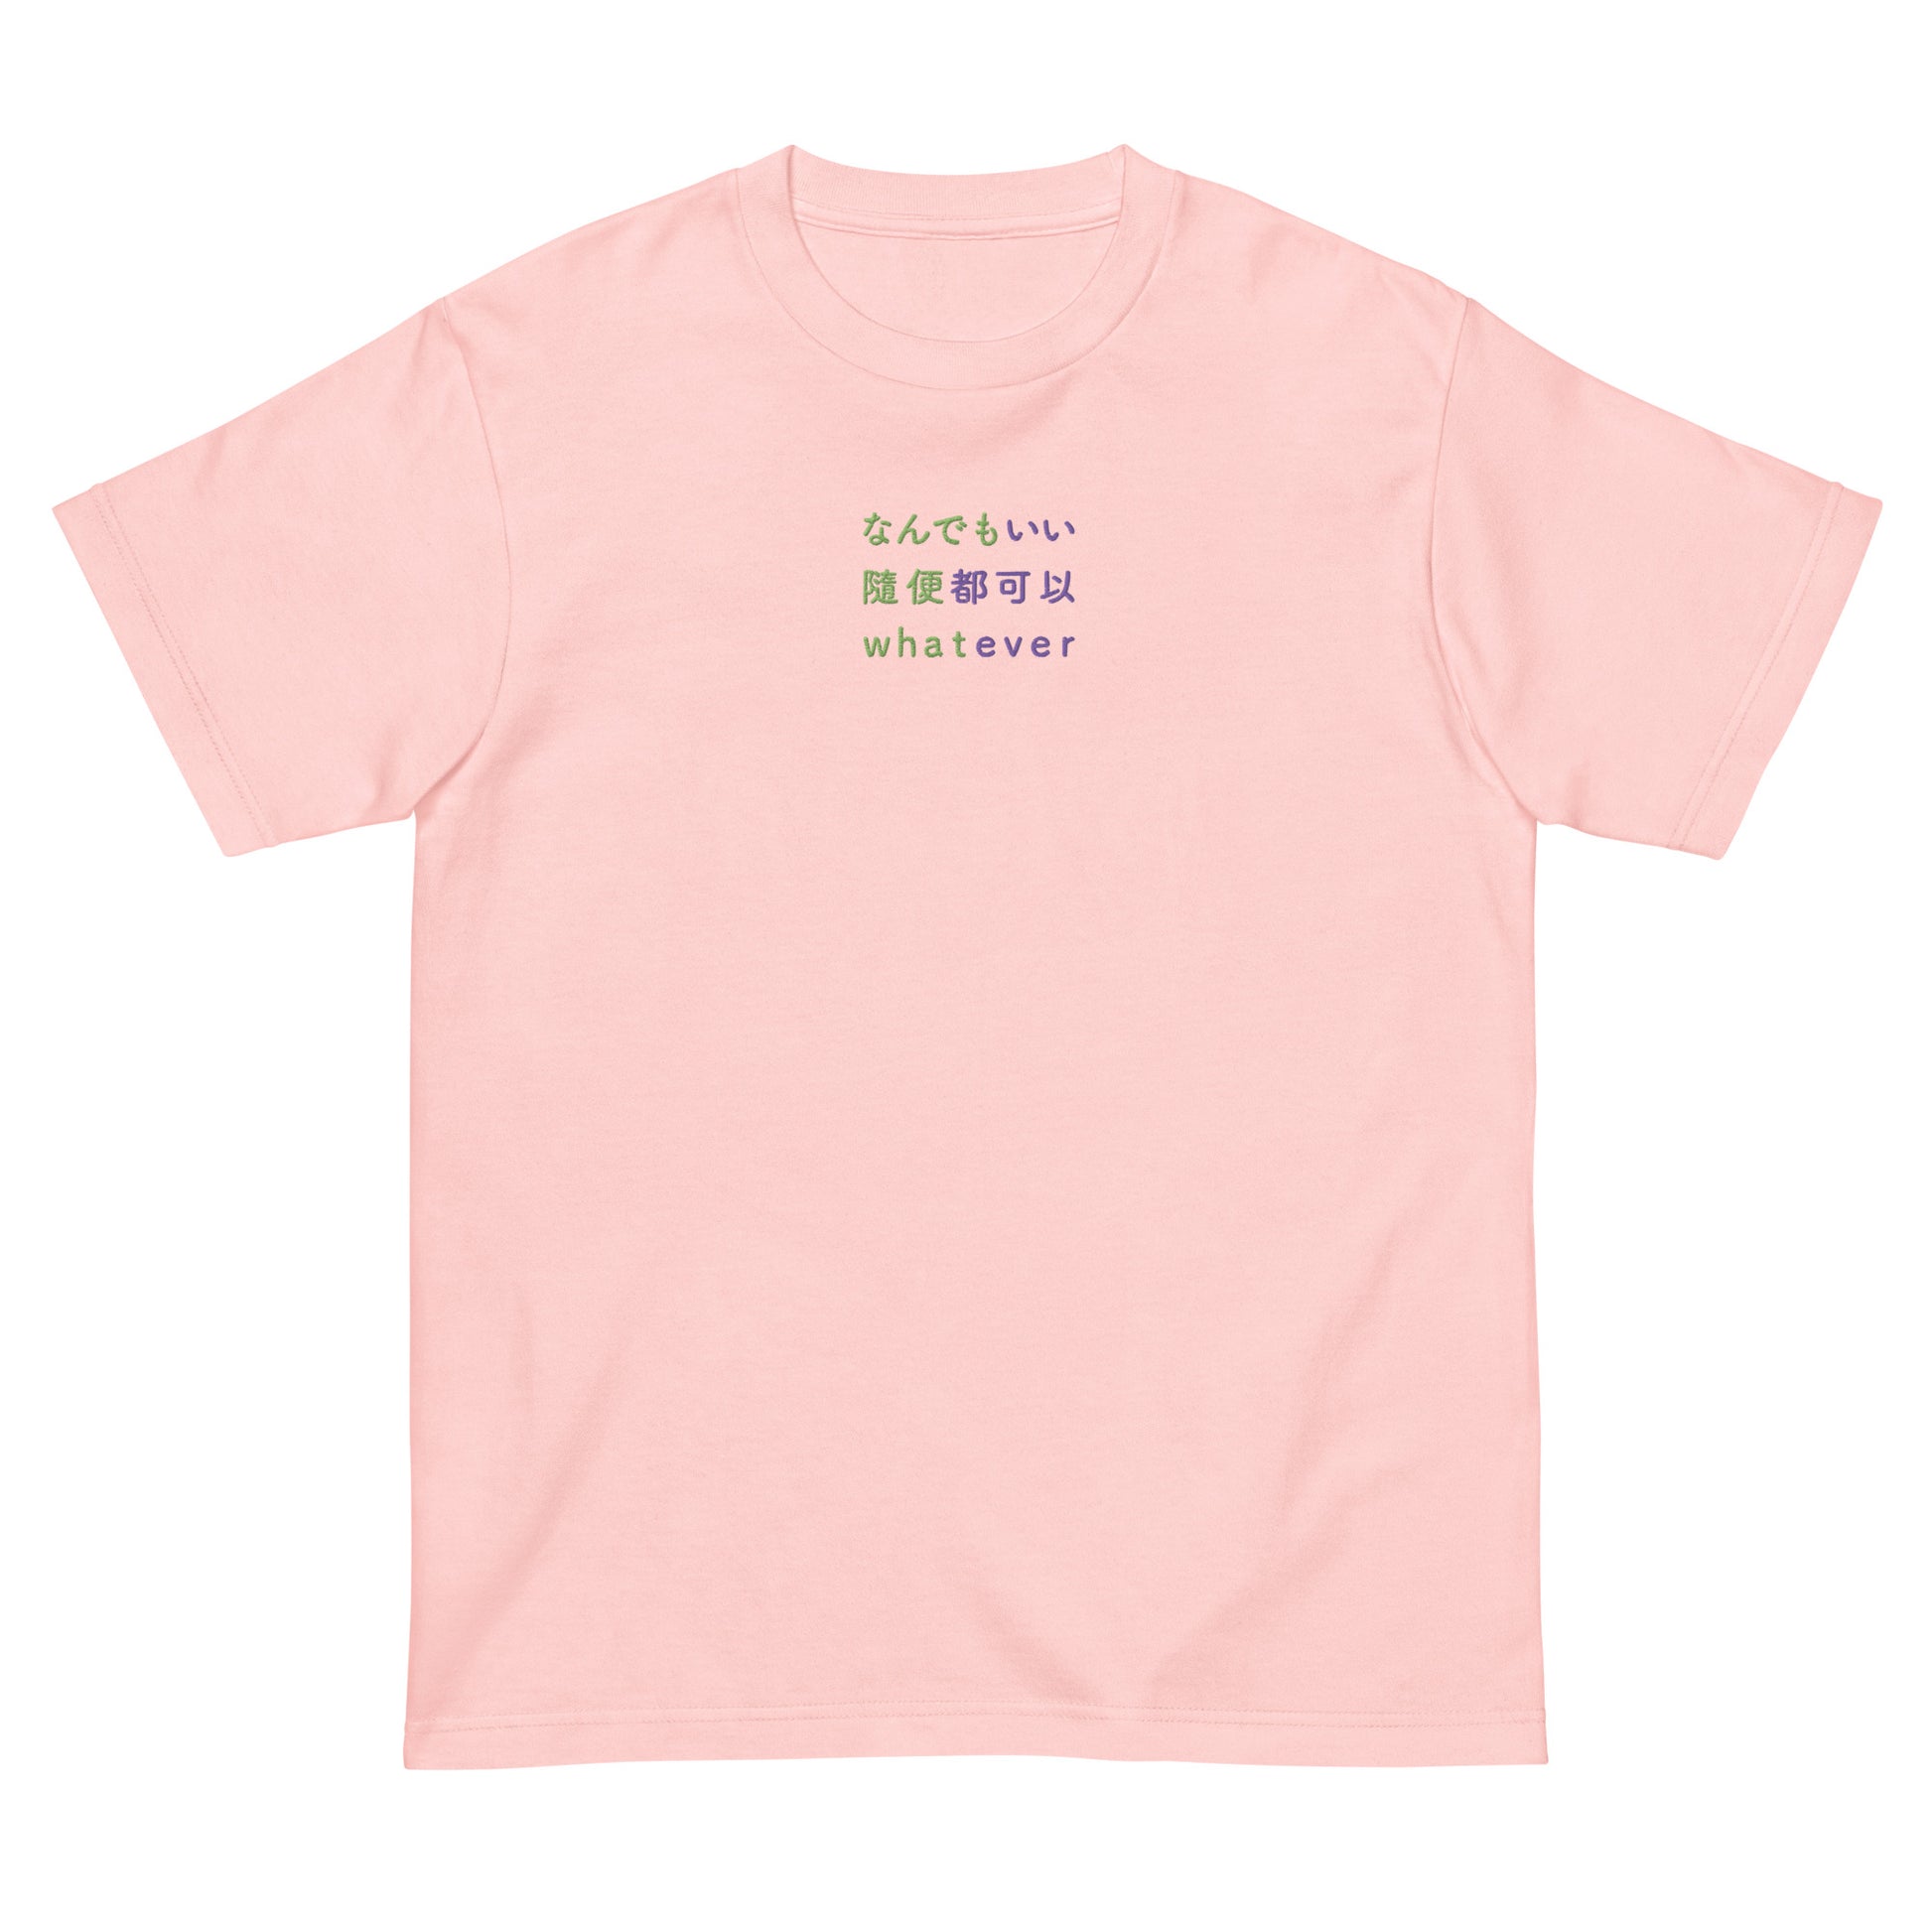 Pink High Quality Tee - Front Design with an Green,Purple Embroidery "Whatever" in Japanese,Chinese and English